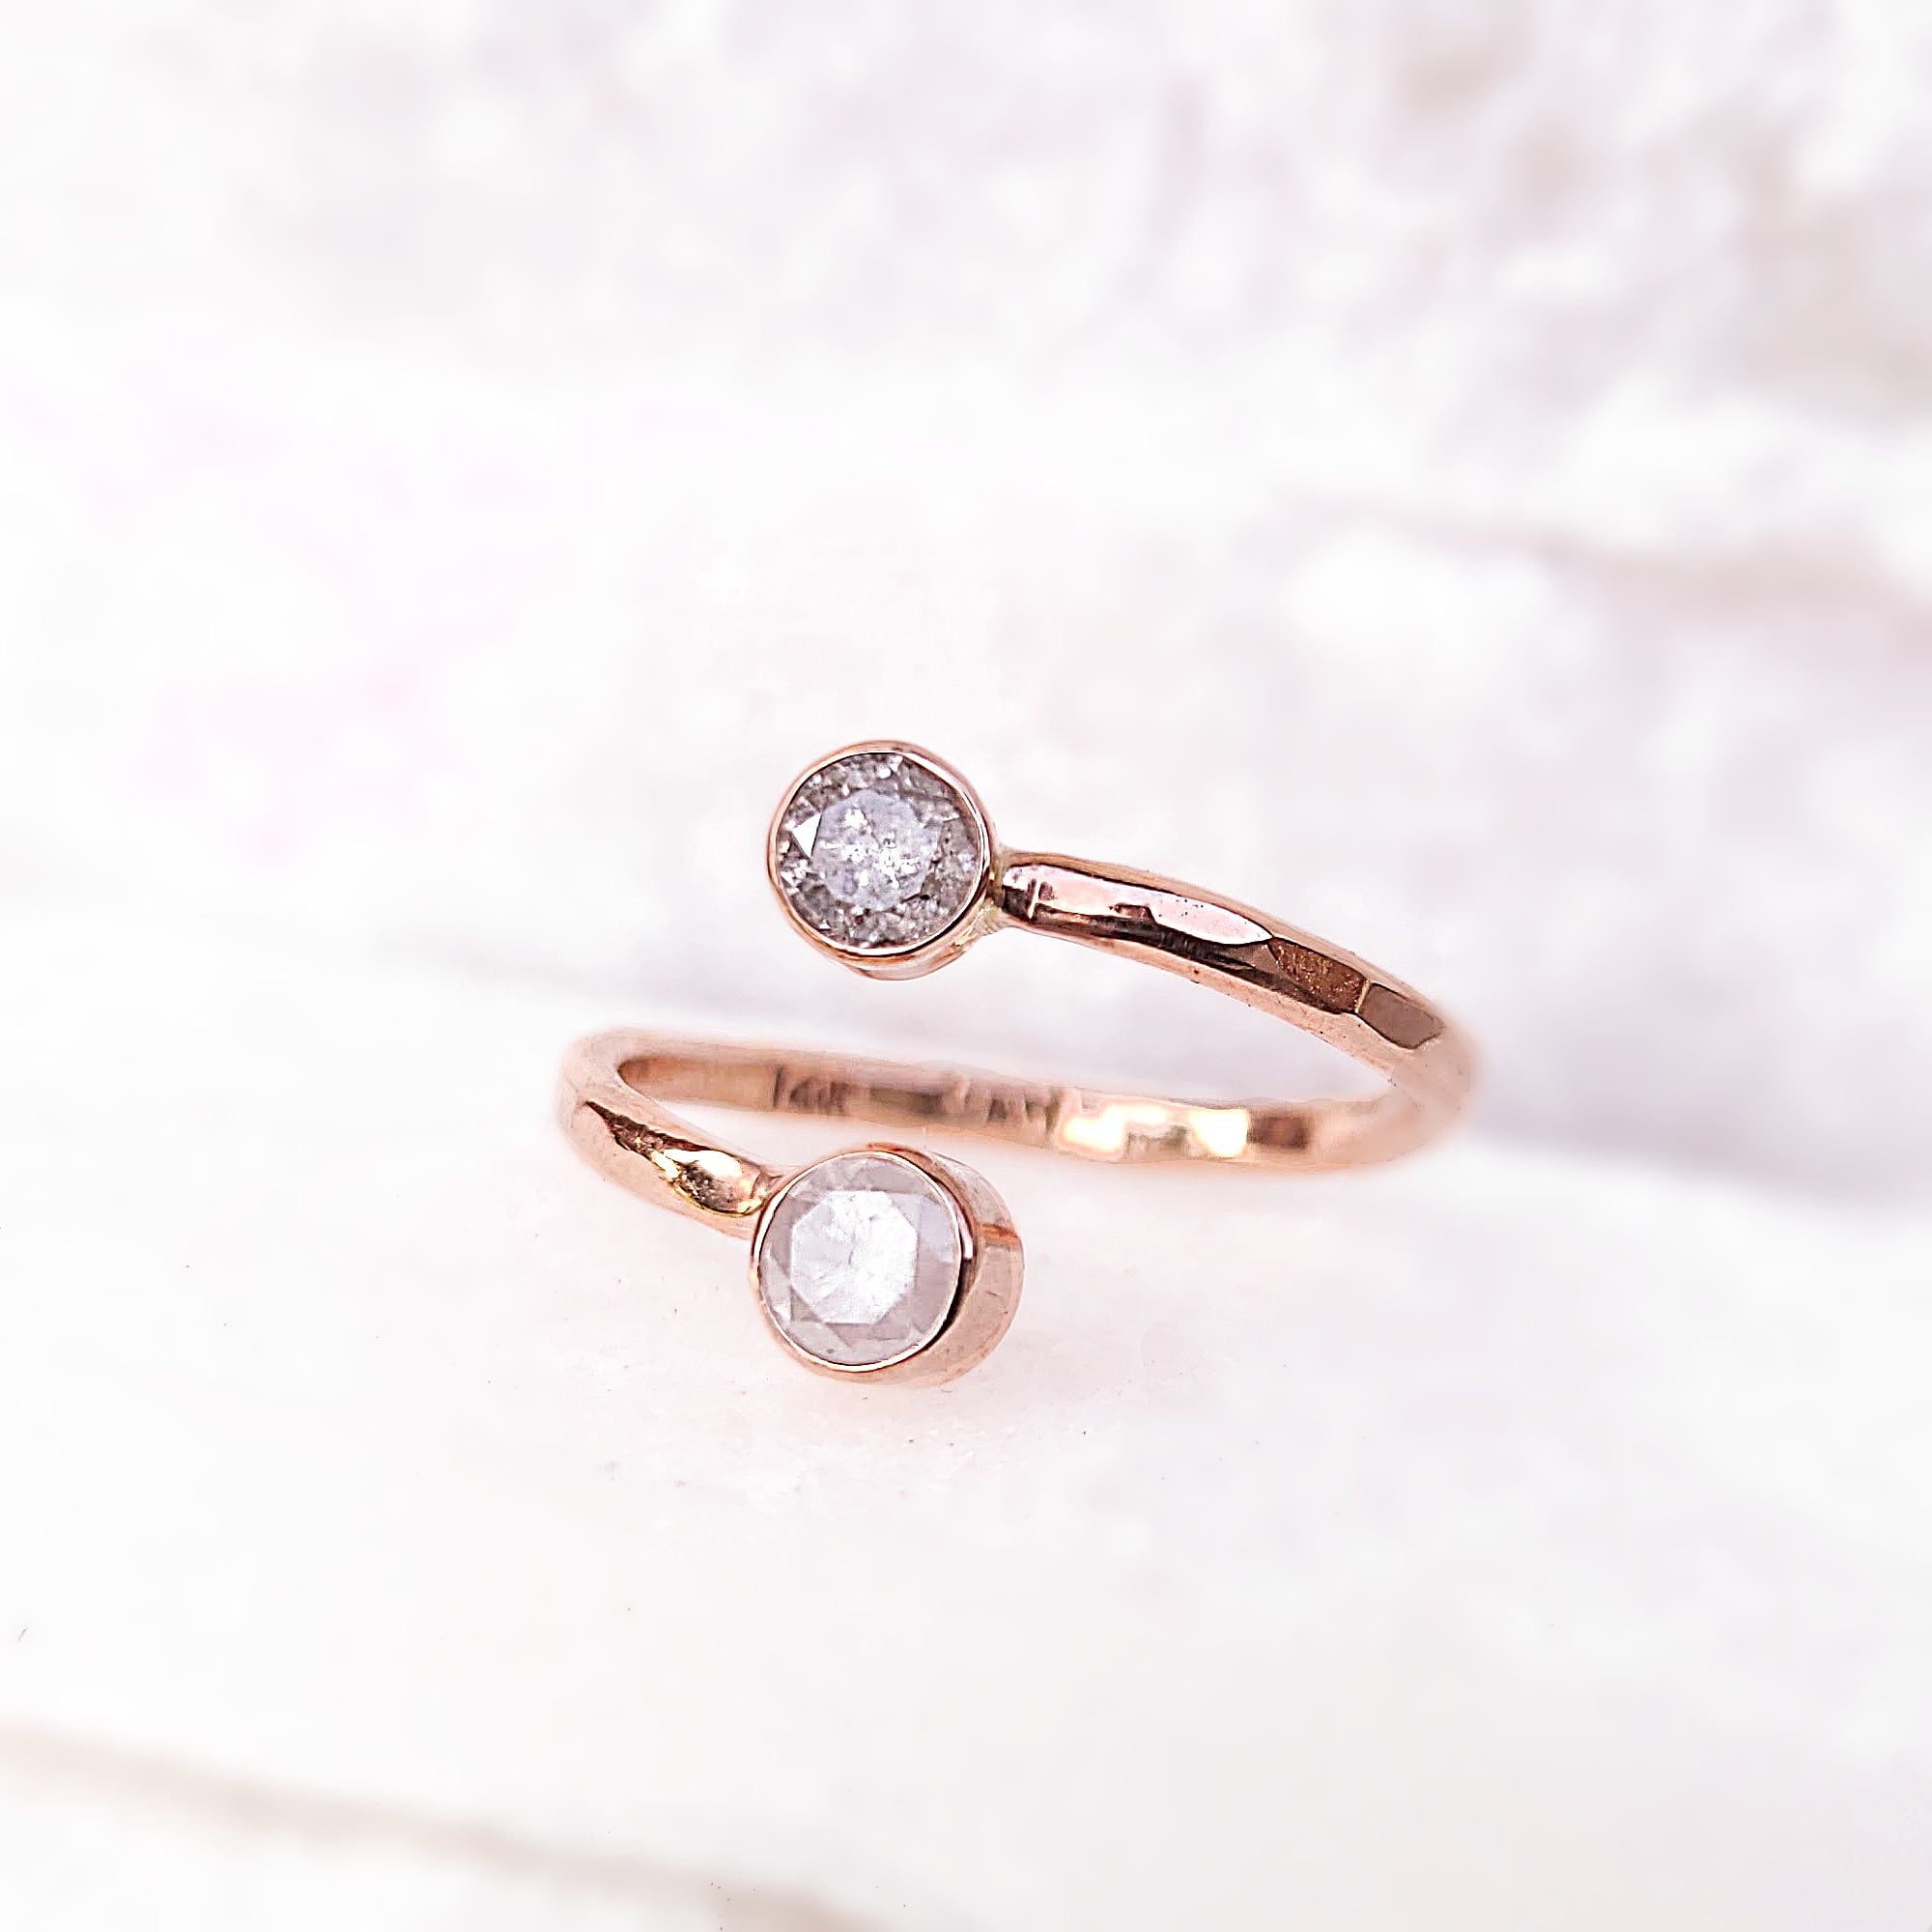 Image of 14K Diamond Bypass Ring in Rose Gold - Size 8